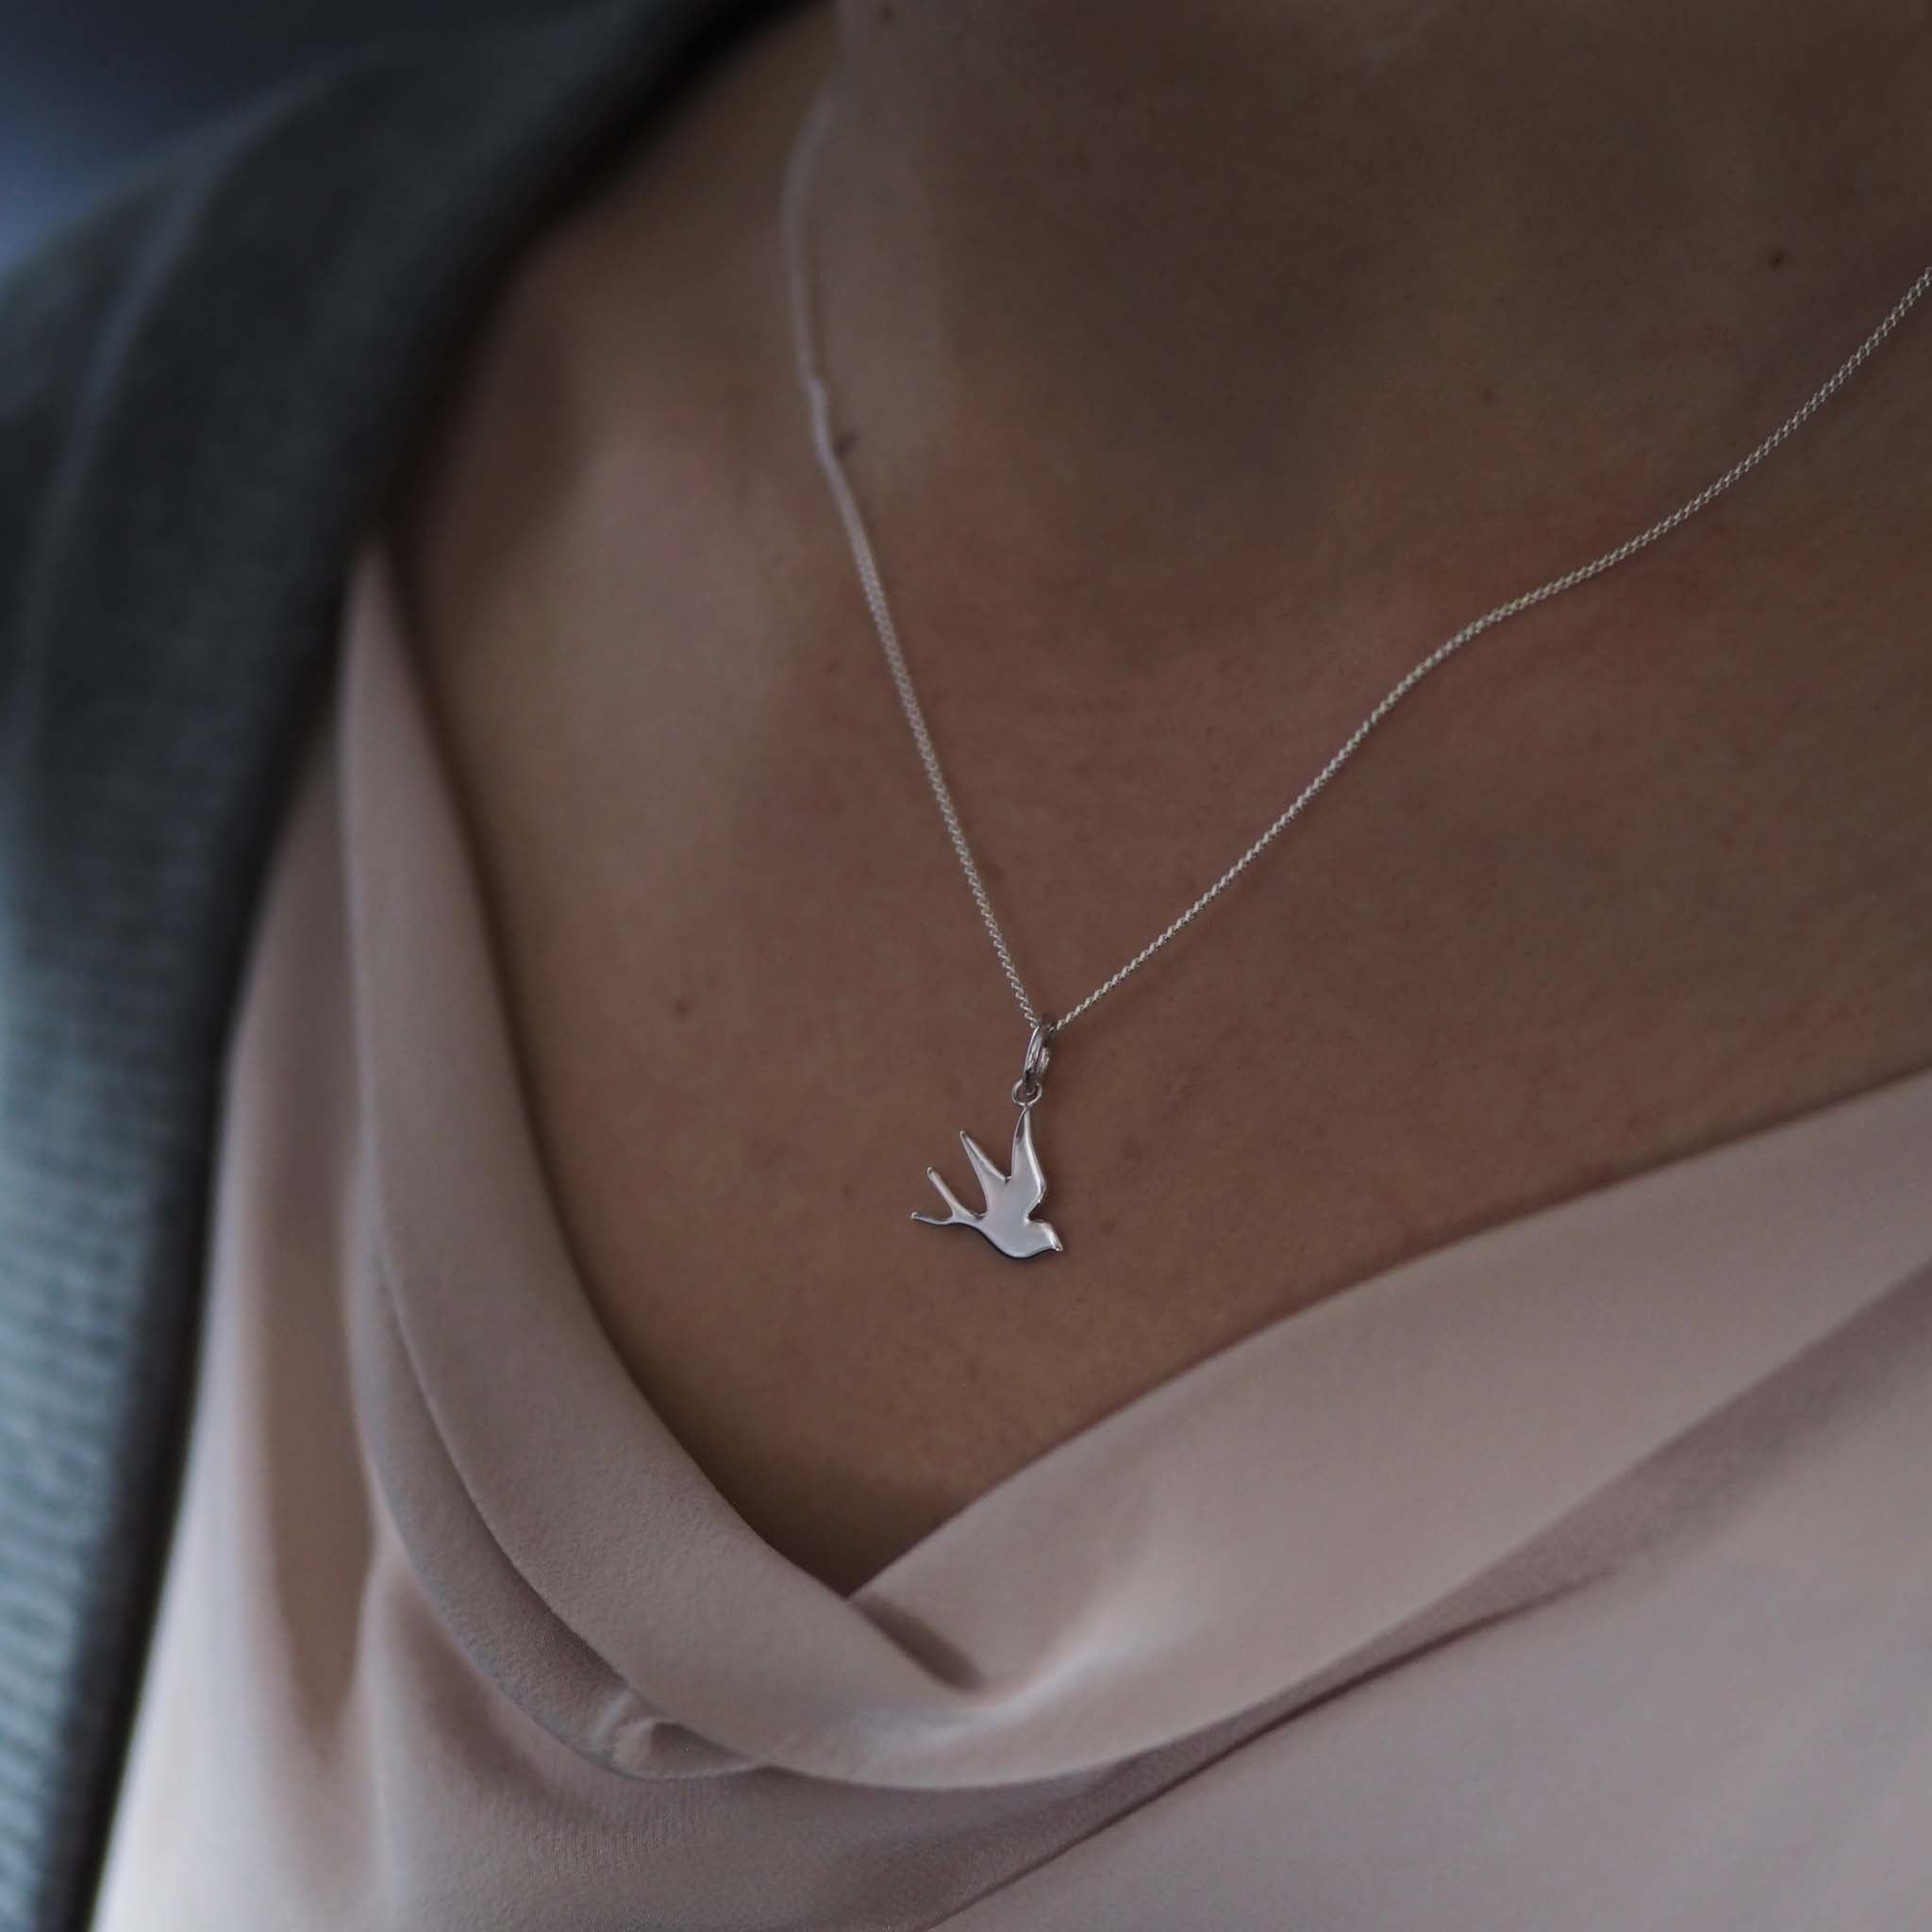 Bianca Jones flat, highly polished swallow charm in sterling silver or gold vermeil, symbolising freedom and hope